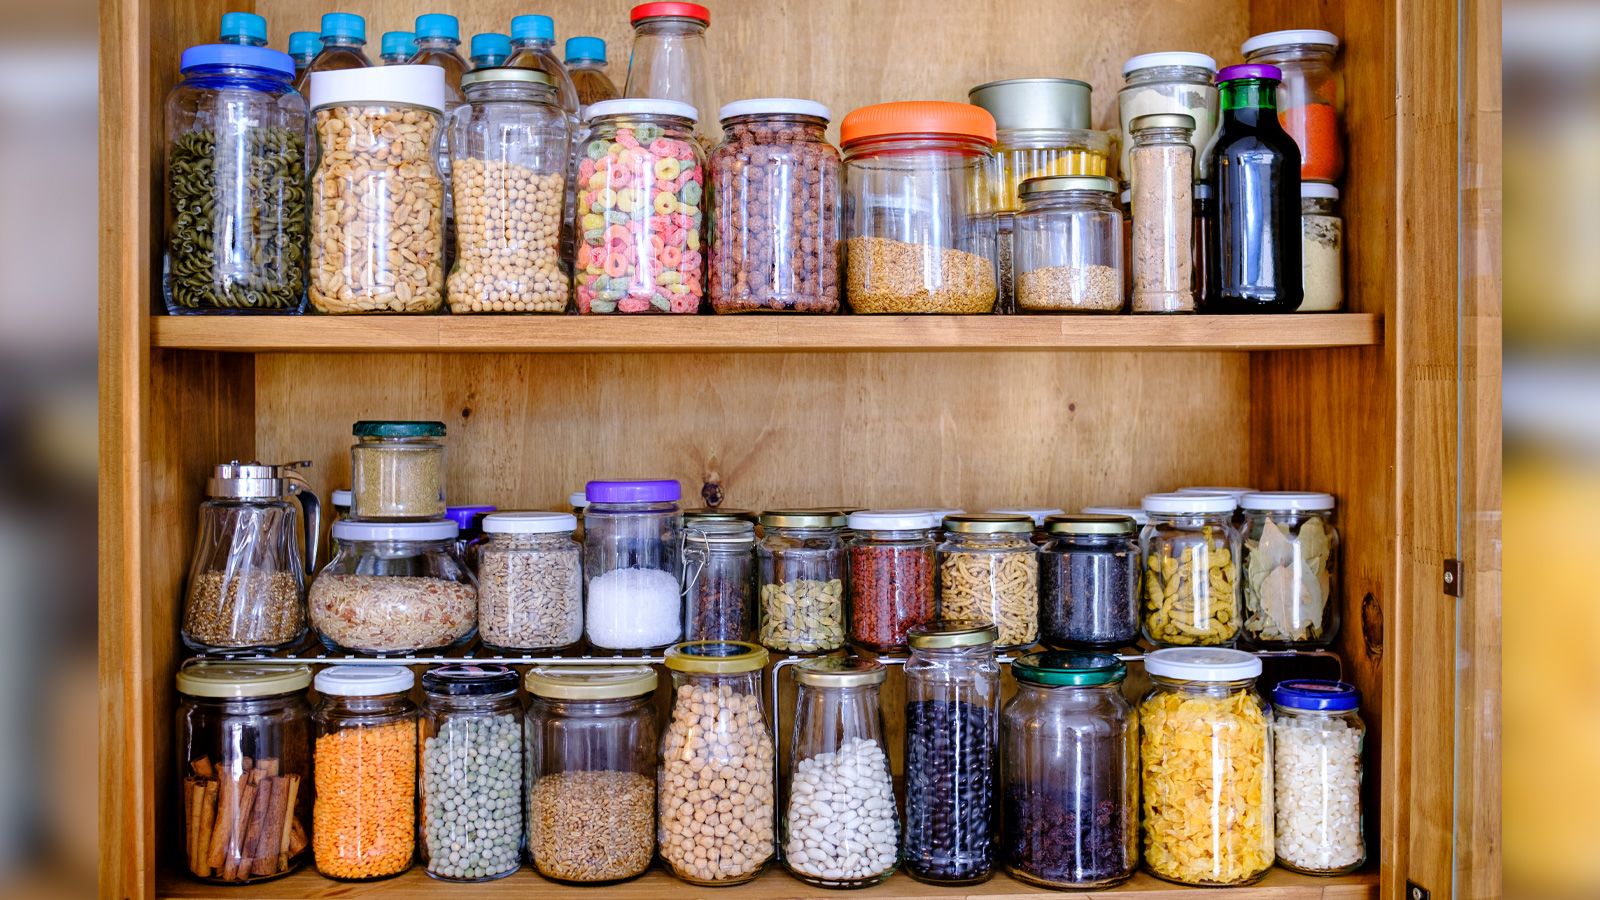 https://media.cnn.com/api/v1/images/stellar/prod/230316123541-04-kitchen-organizing-pantry-containers-wellness-old-containers-stock.jpg?c=original